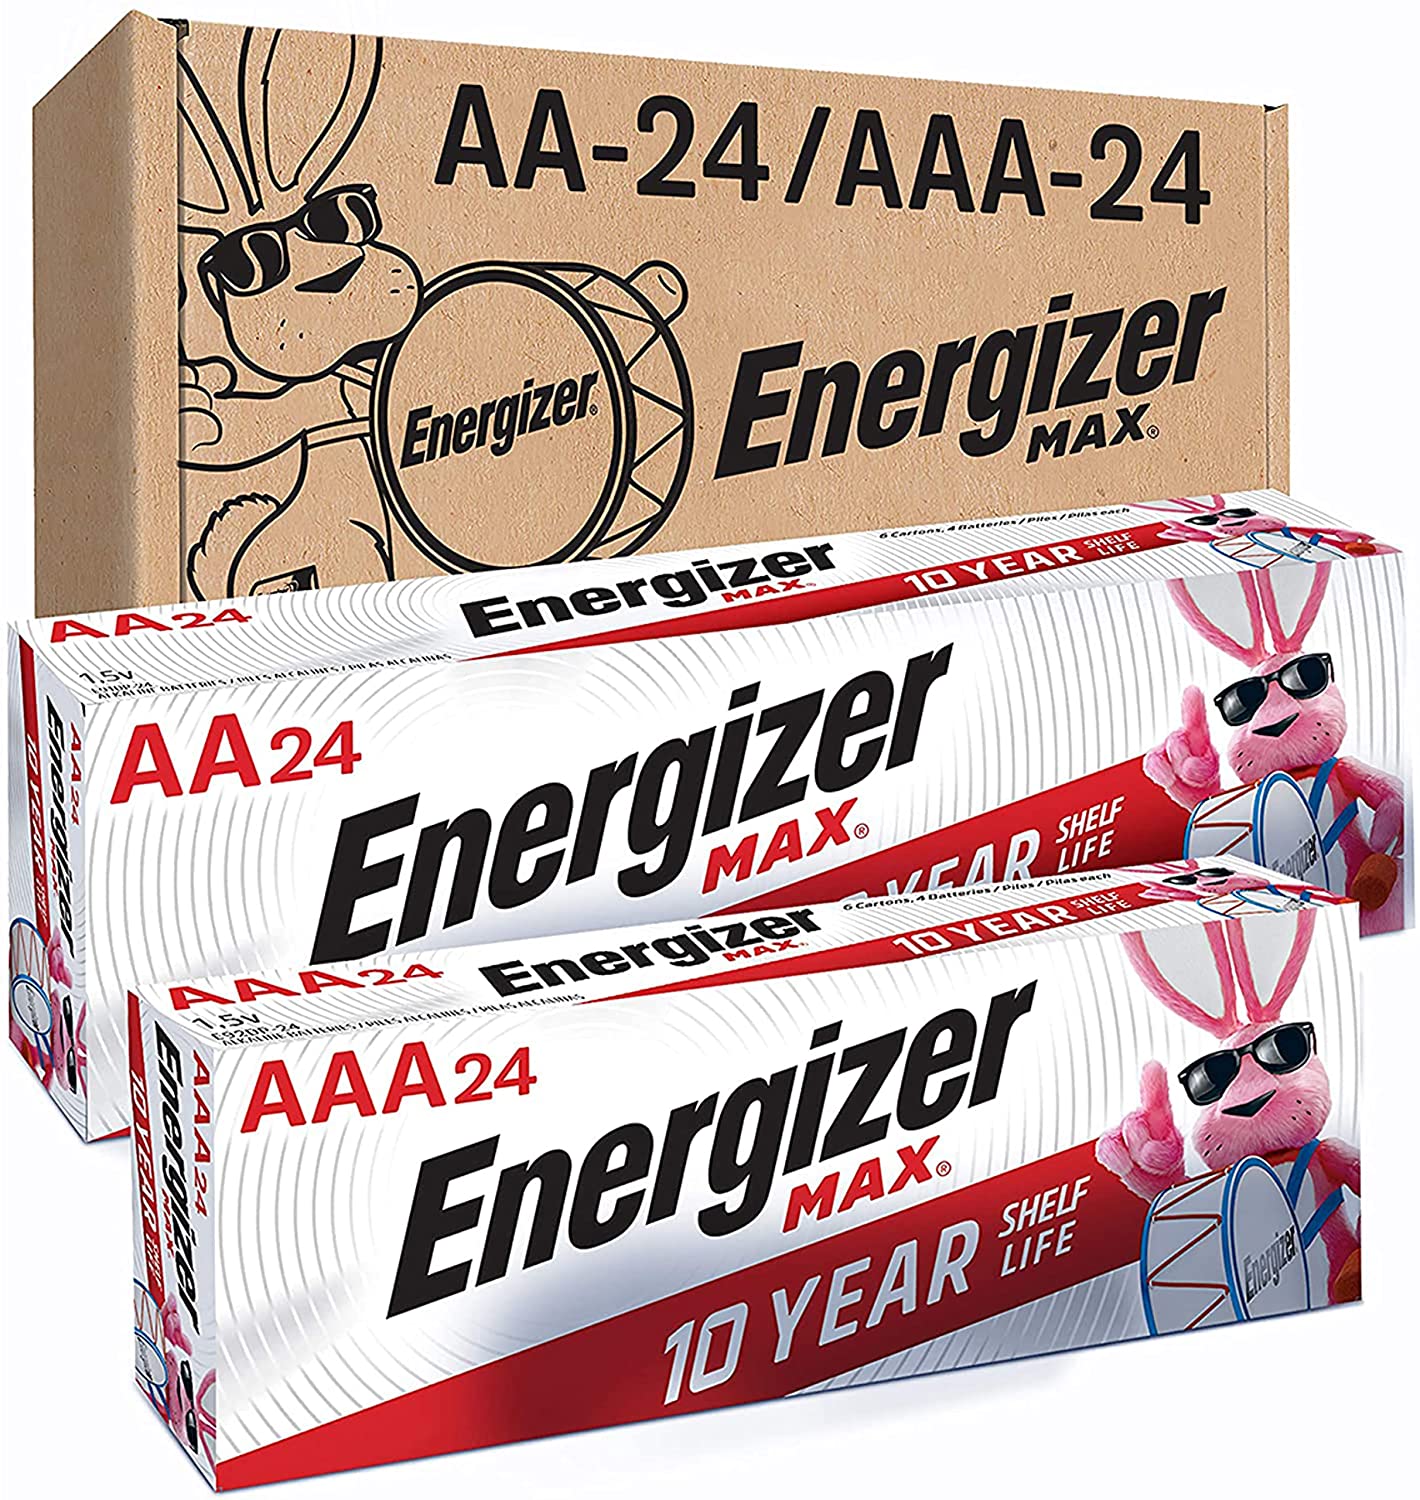 Energizer MAX AA Batteries & AAA Batteries Combo Pack Amazon Deal!